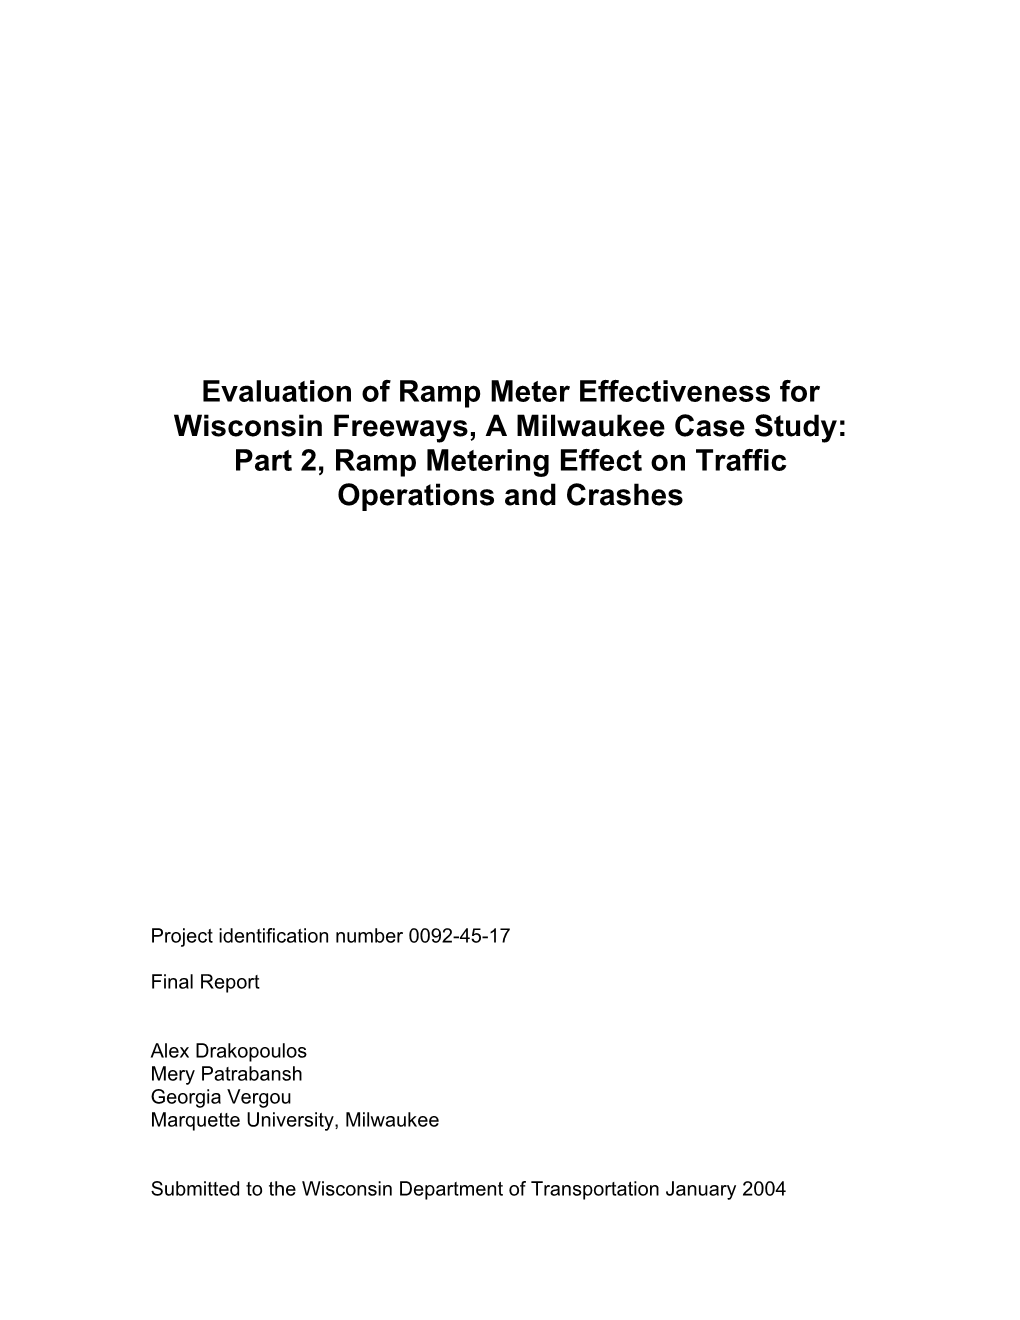 Evaluation of Ramp Meter Effectiveness for Wisconsin Freeways, a Milwaukee Case Study: Part 2, Ramp Metering Effect on Traffic Operations and Crashes